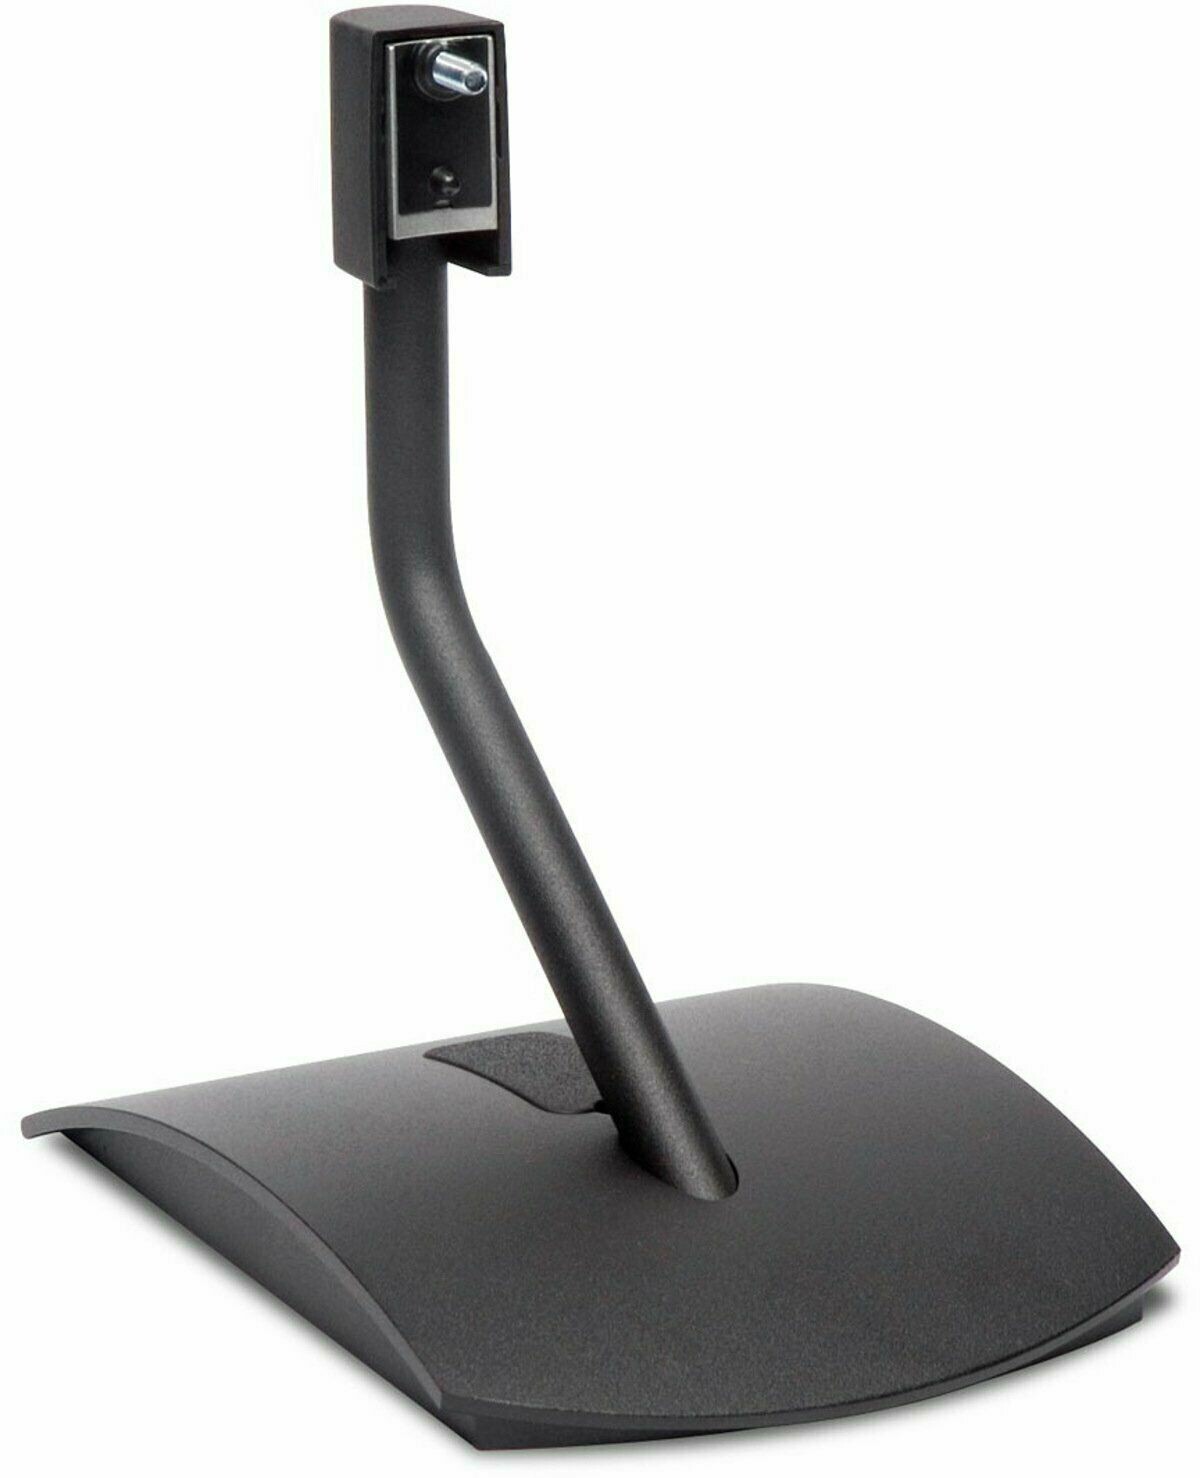 Bose Universal Table Stand for Bose Lifestyle Surround Speakers (single stand)